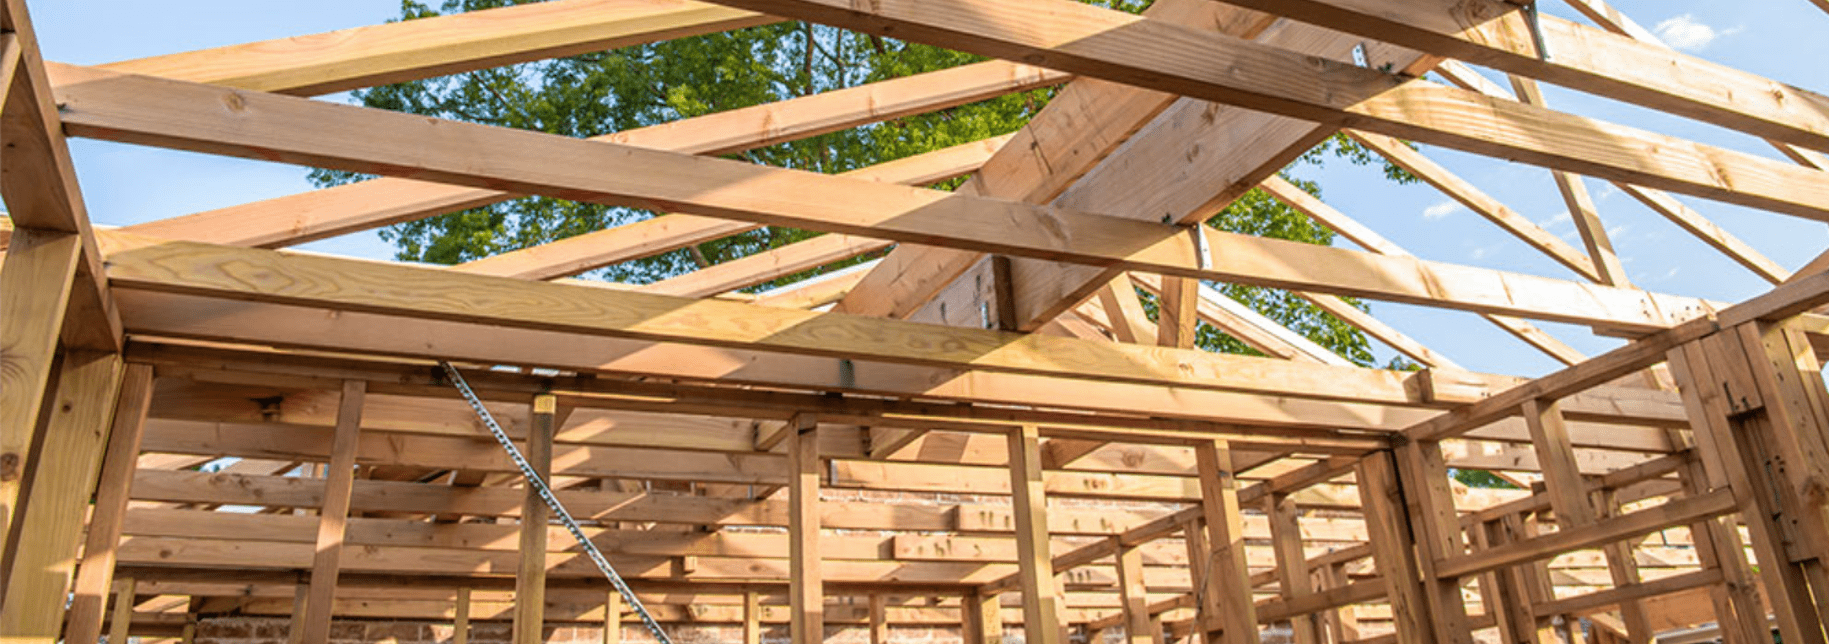 Timber framing walls and ceiling trusses